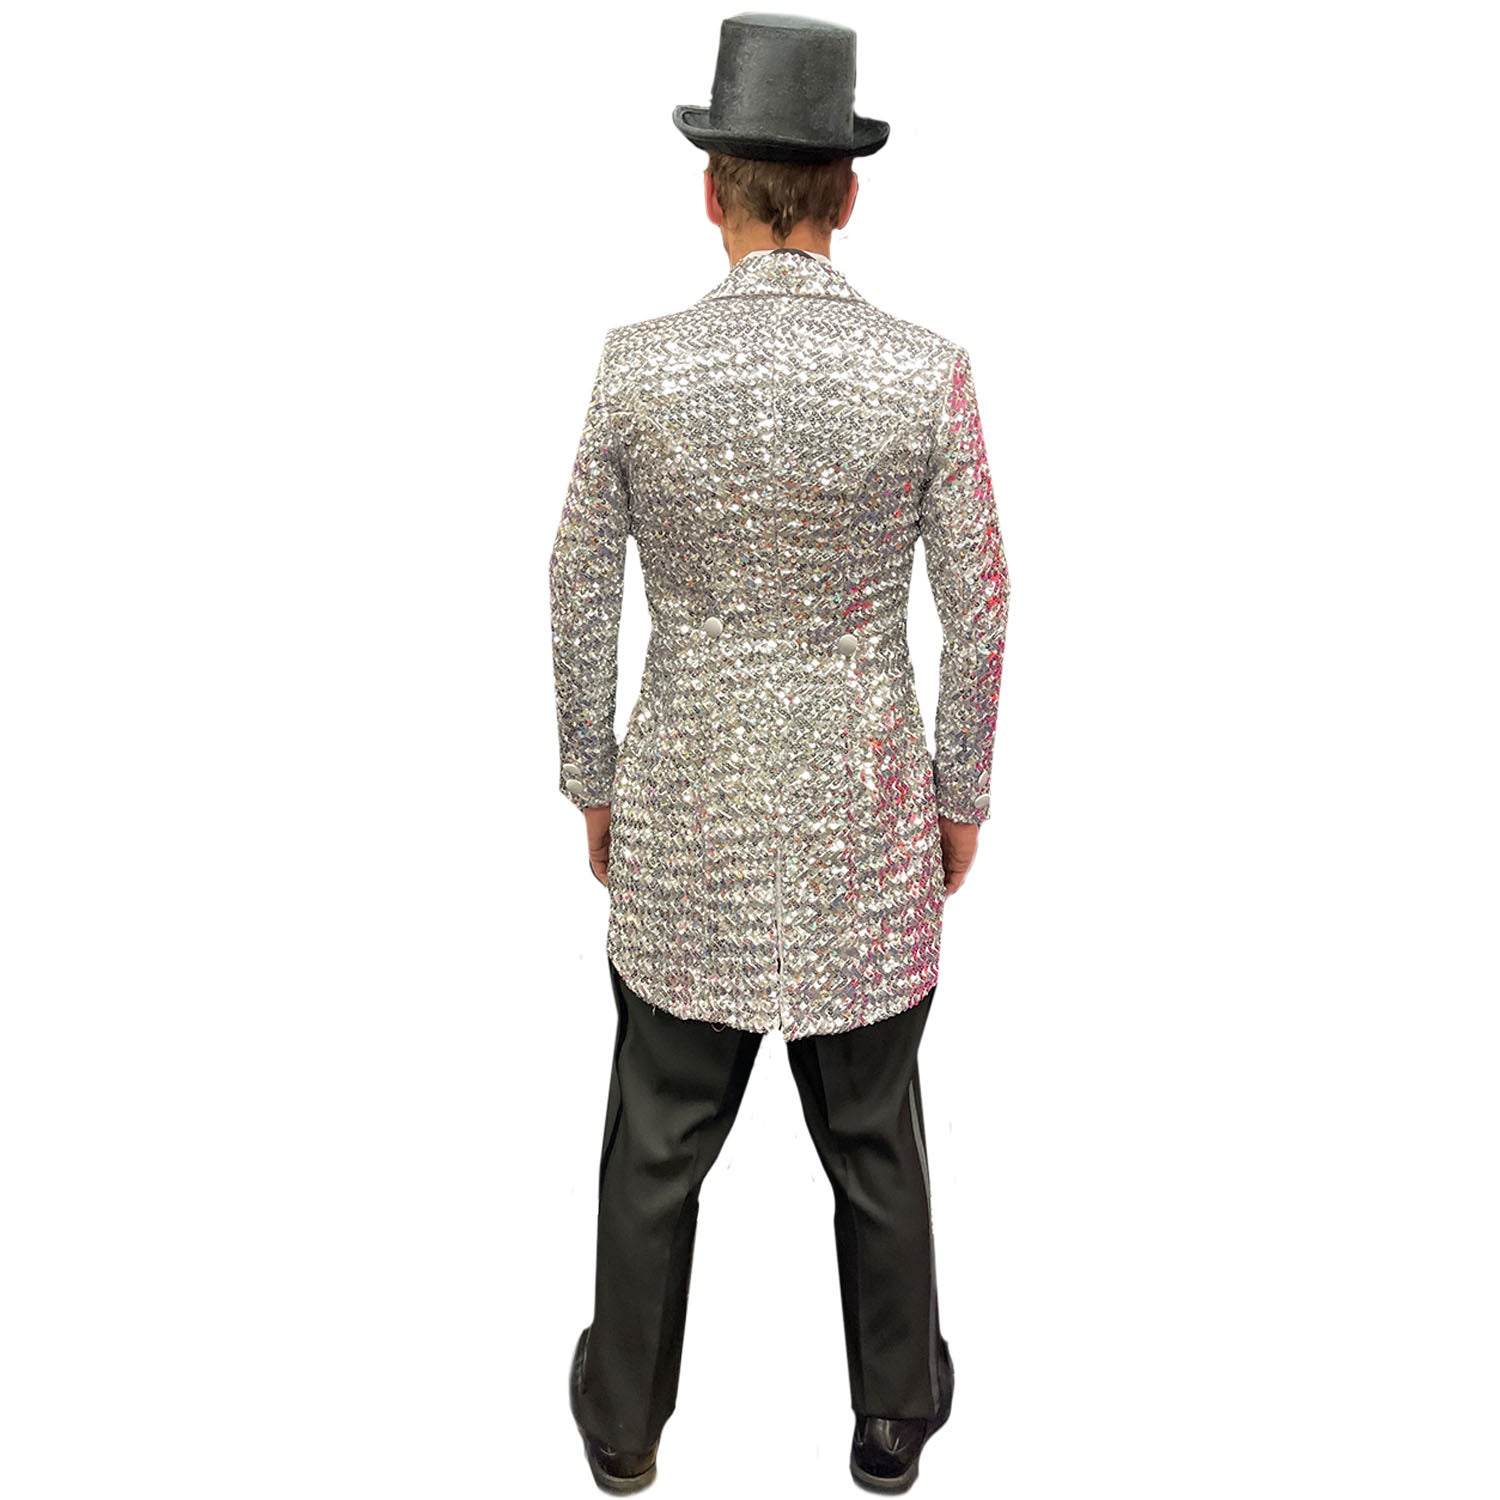 Shimmery Silver Sequin Mens Adult Tailcoat